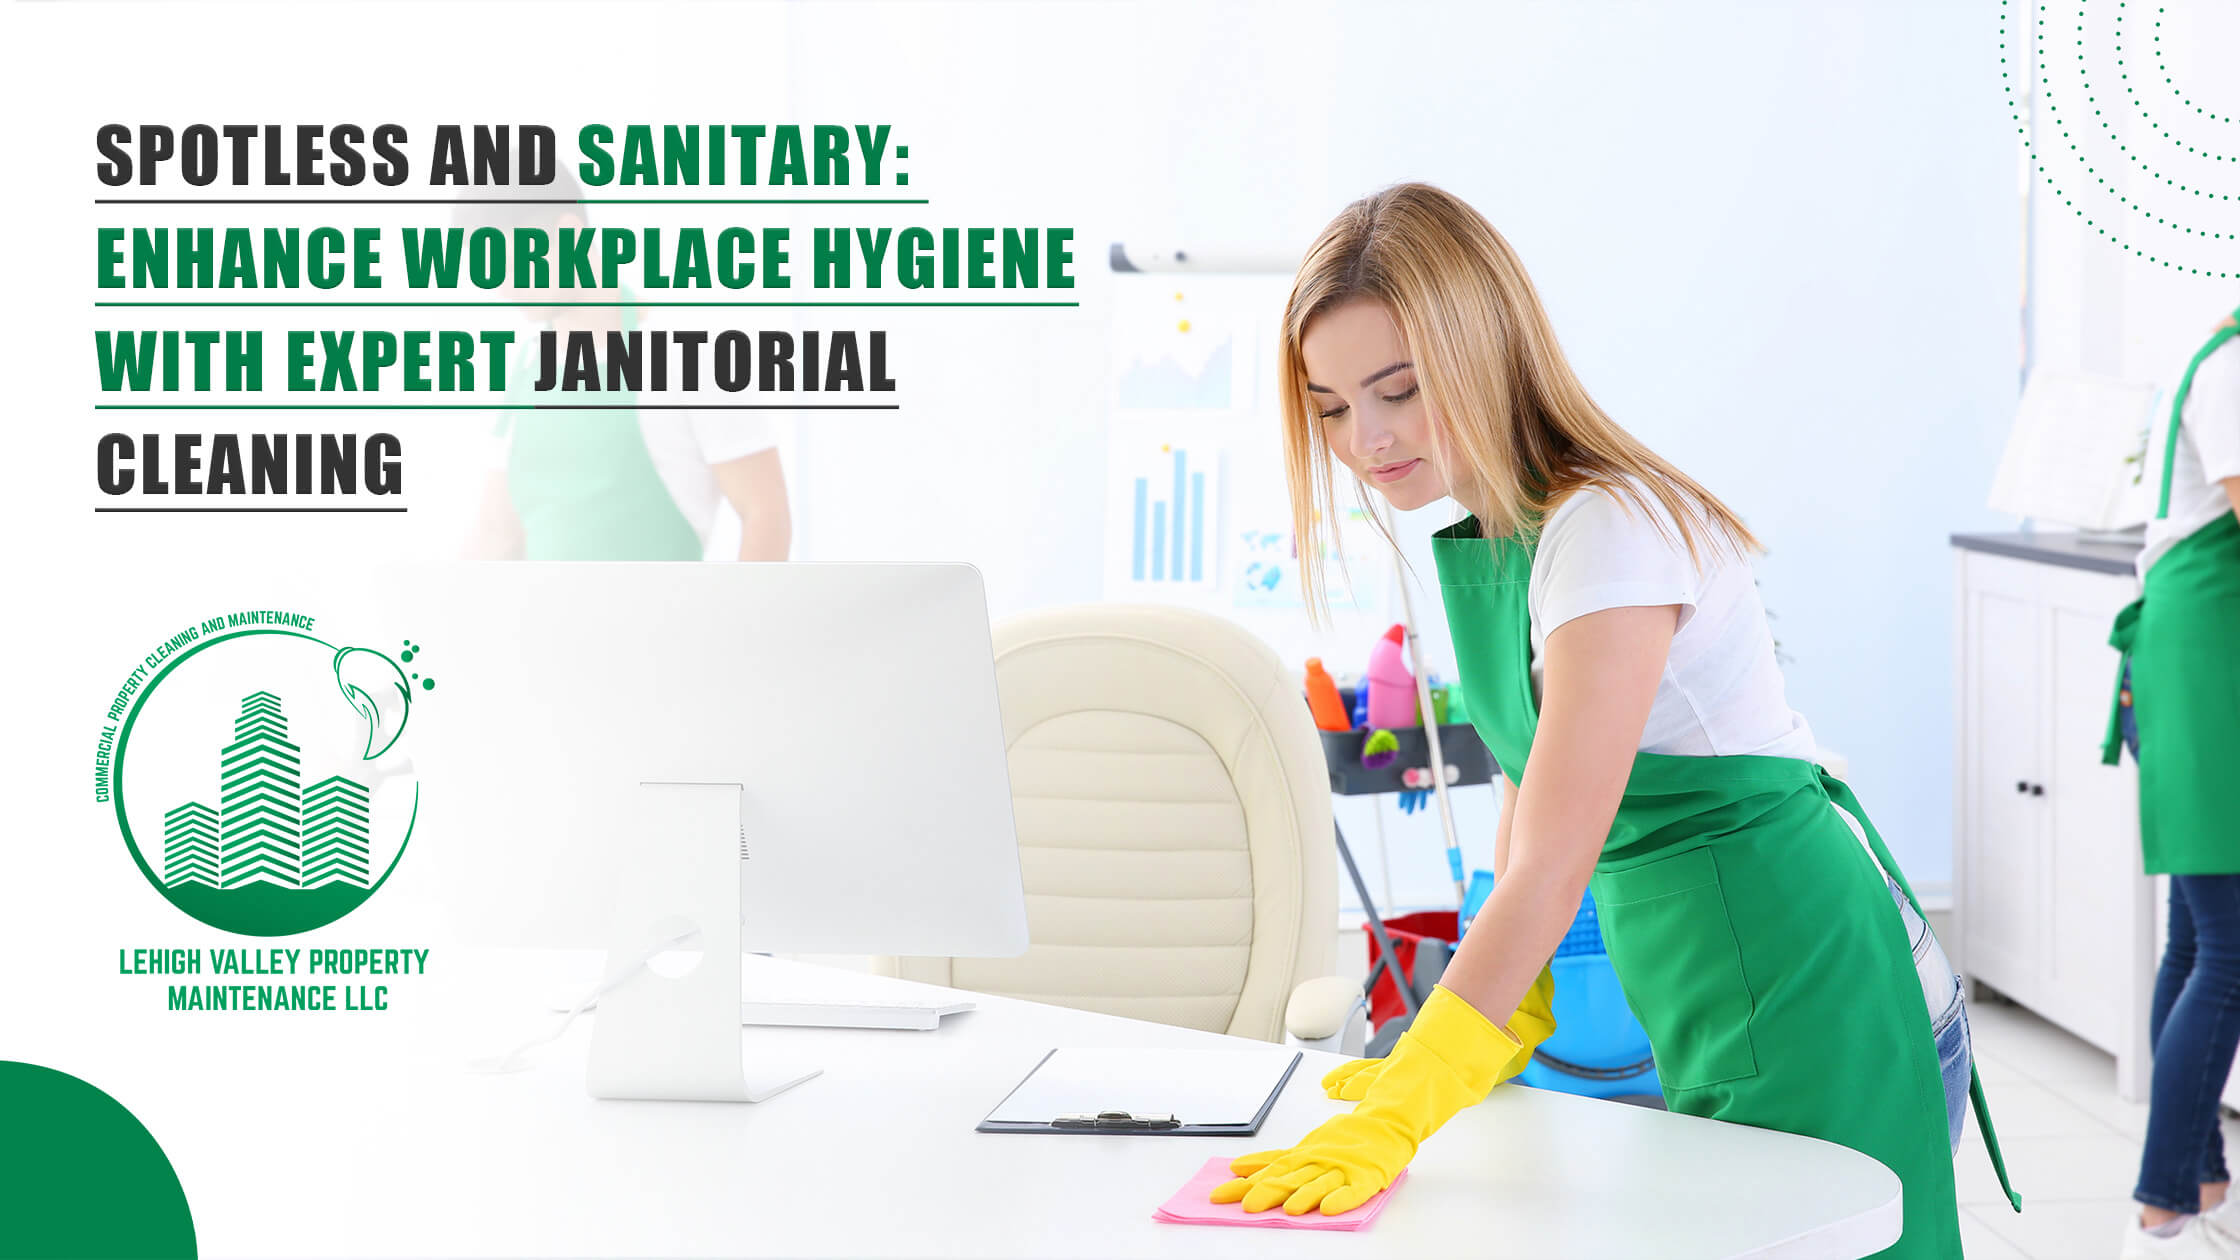 You are currently viewing Spotless and Sanitary: Enhance Workplace Hygiene with Expert Janitorial Cleaning